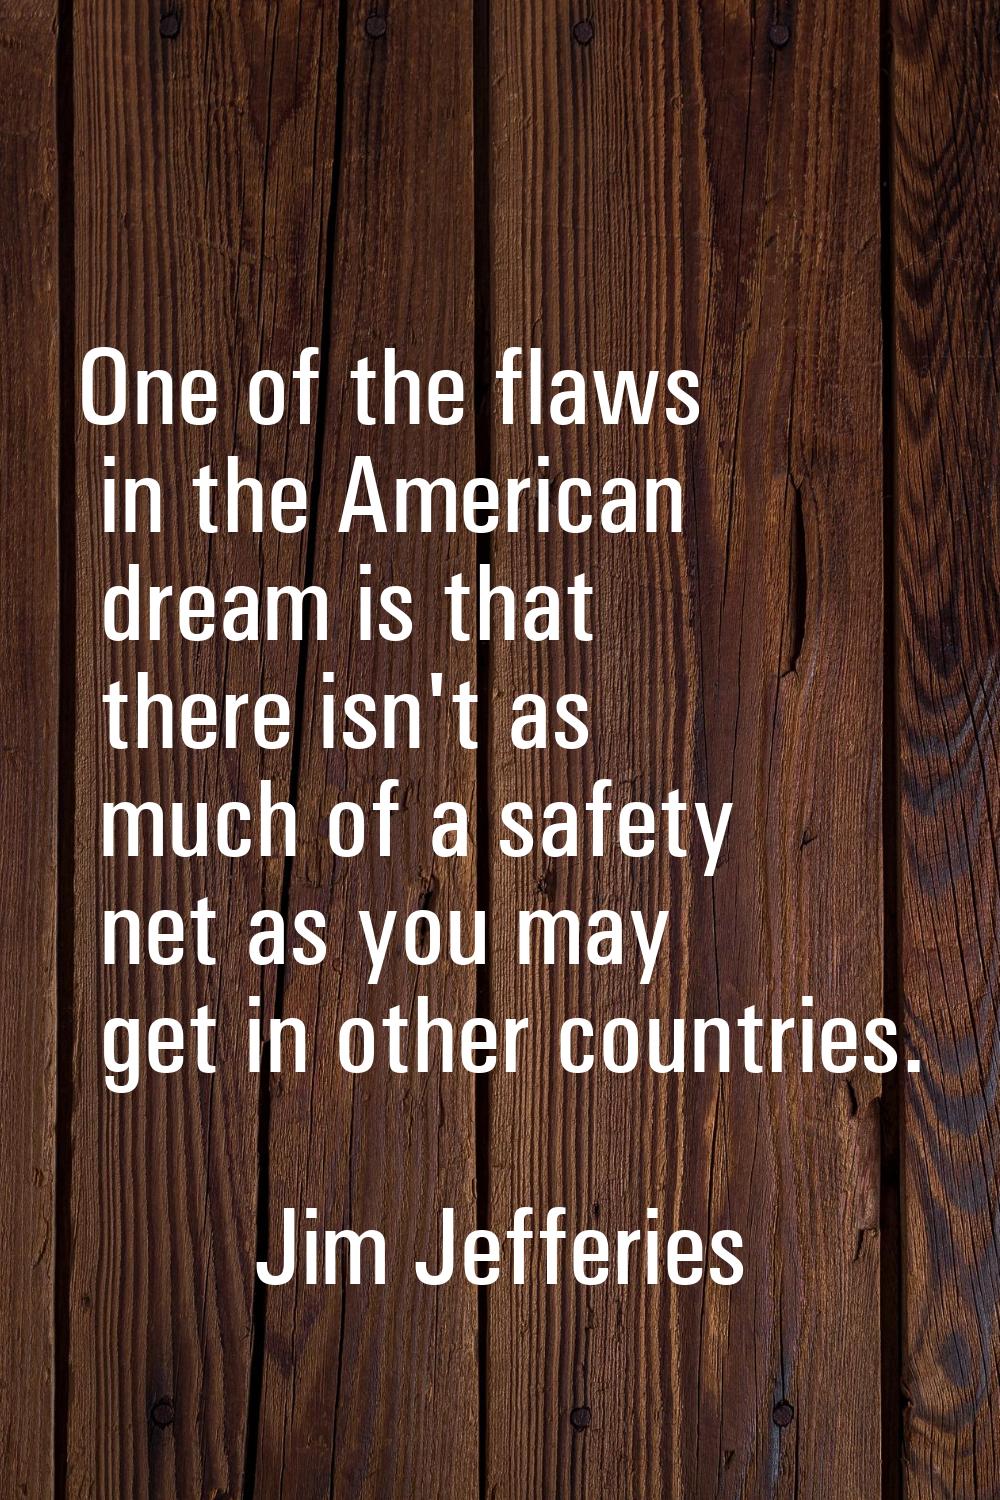 One of the flaws in the American dream is that there isn't as much of a safety net as you may get i